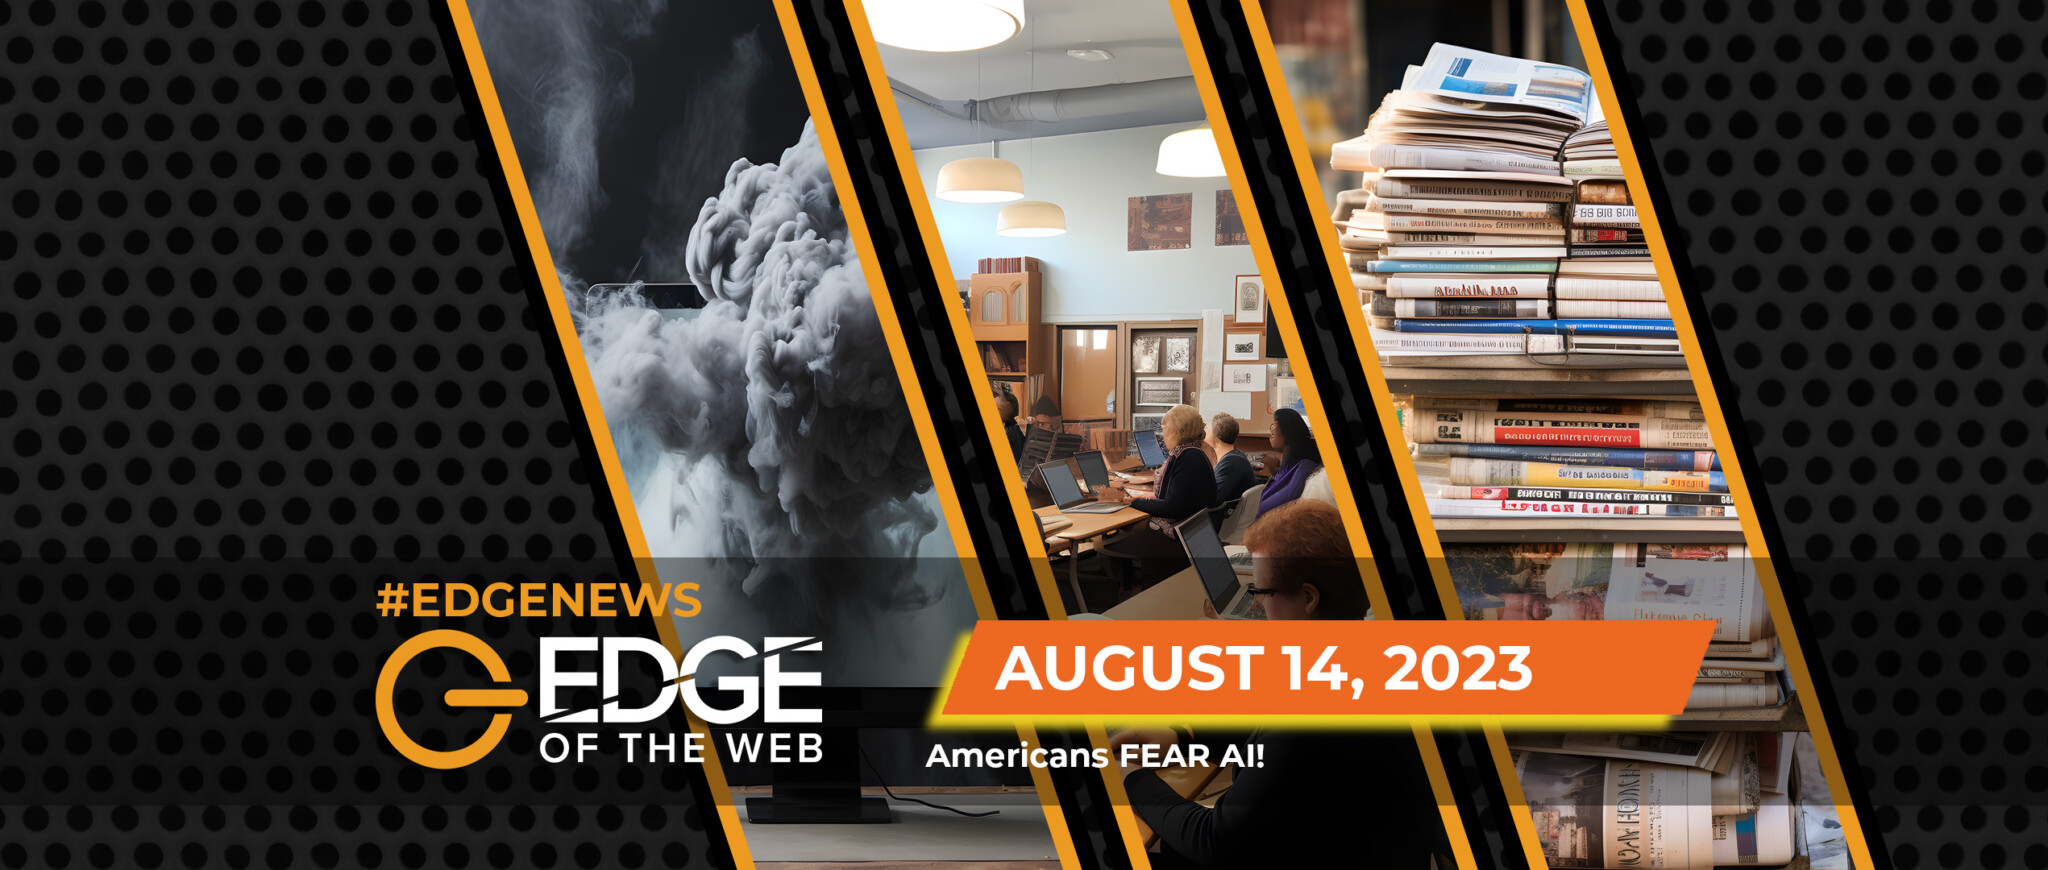 617 | News from the EDGE | Week of 8.14.2023